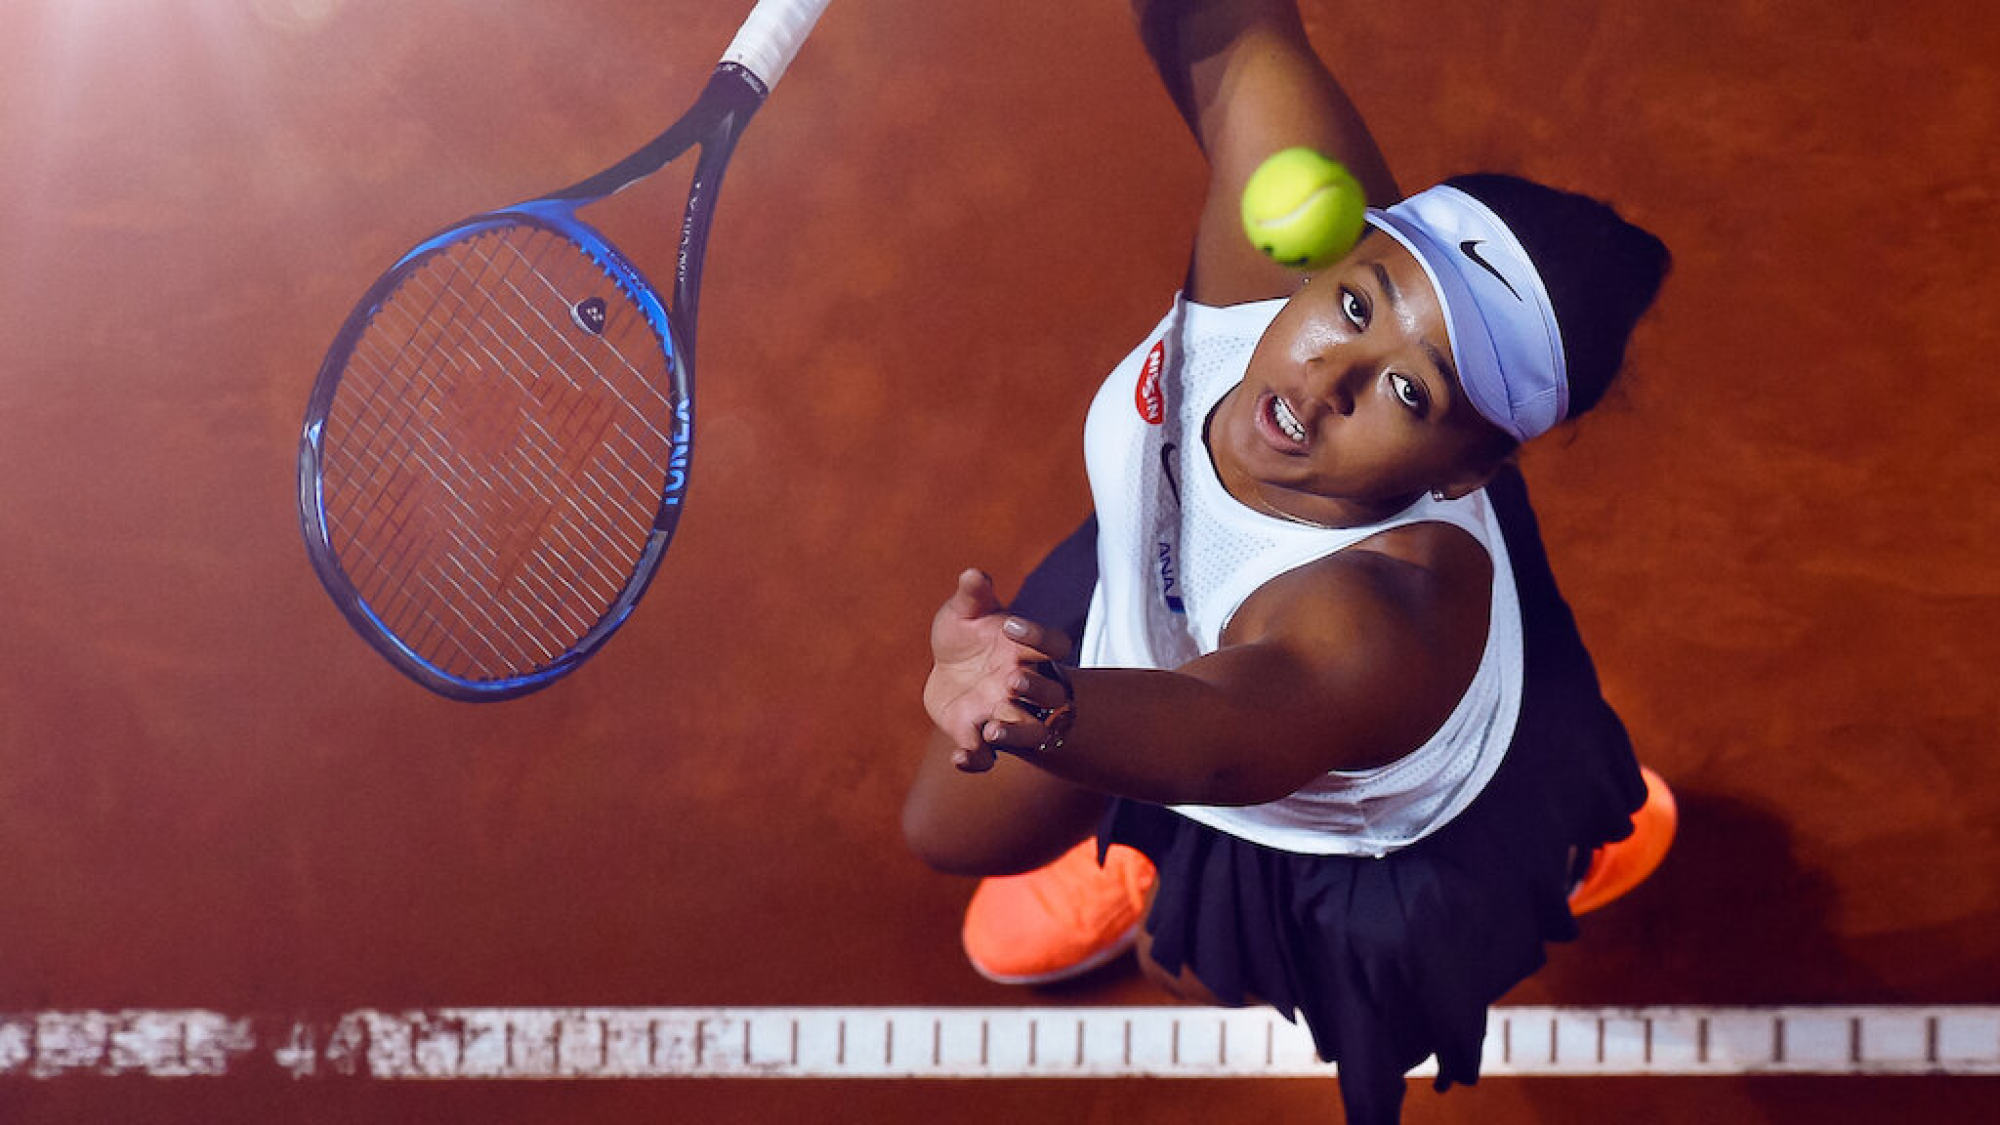 Naomi Osaka is the highest paid female athlete, so what is her net worth?